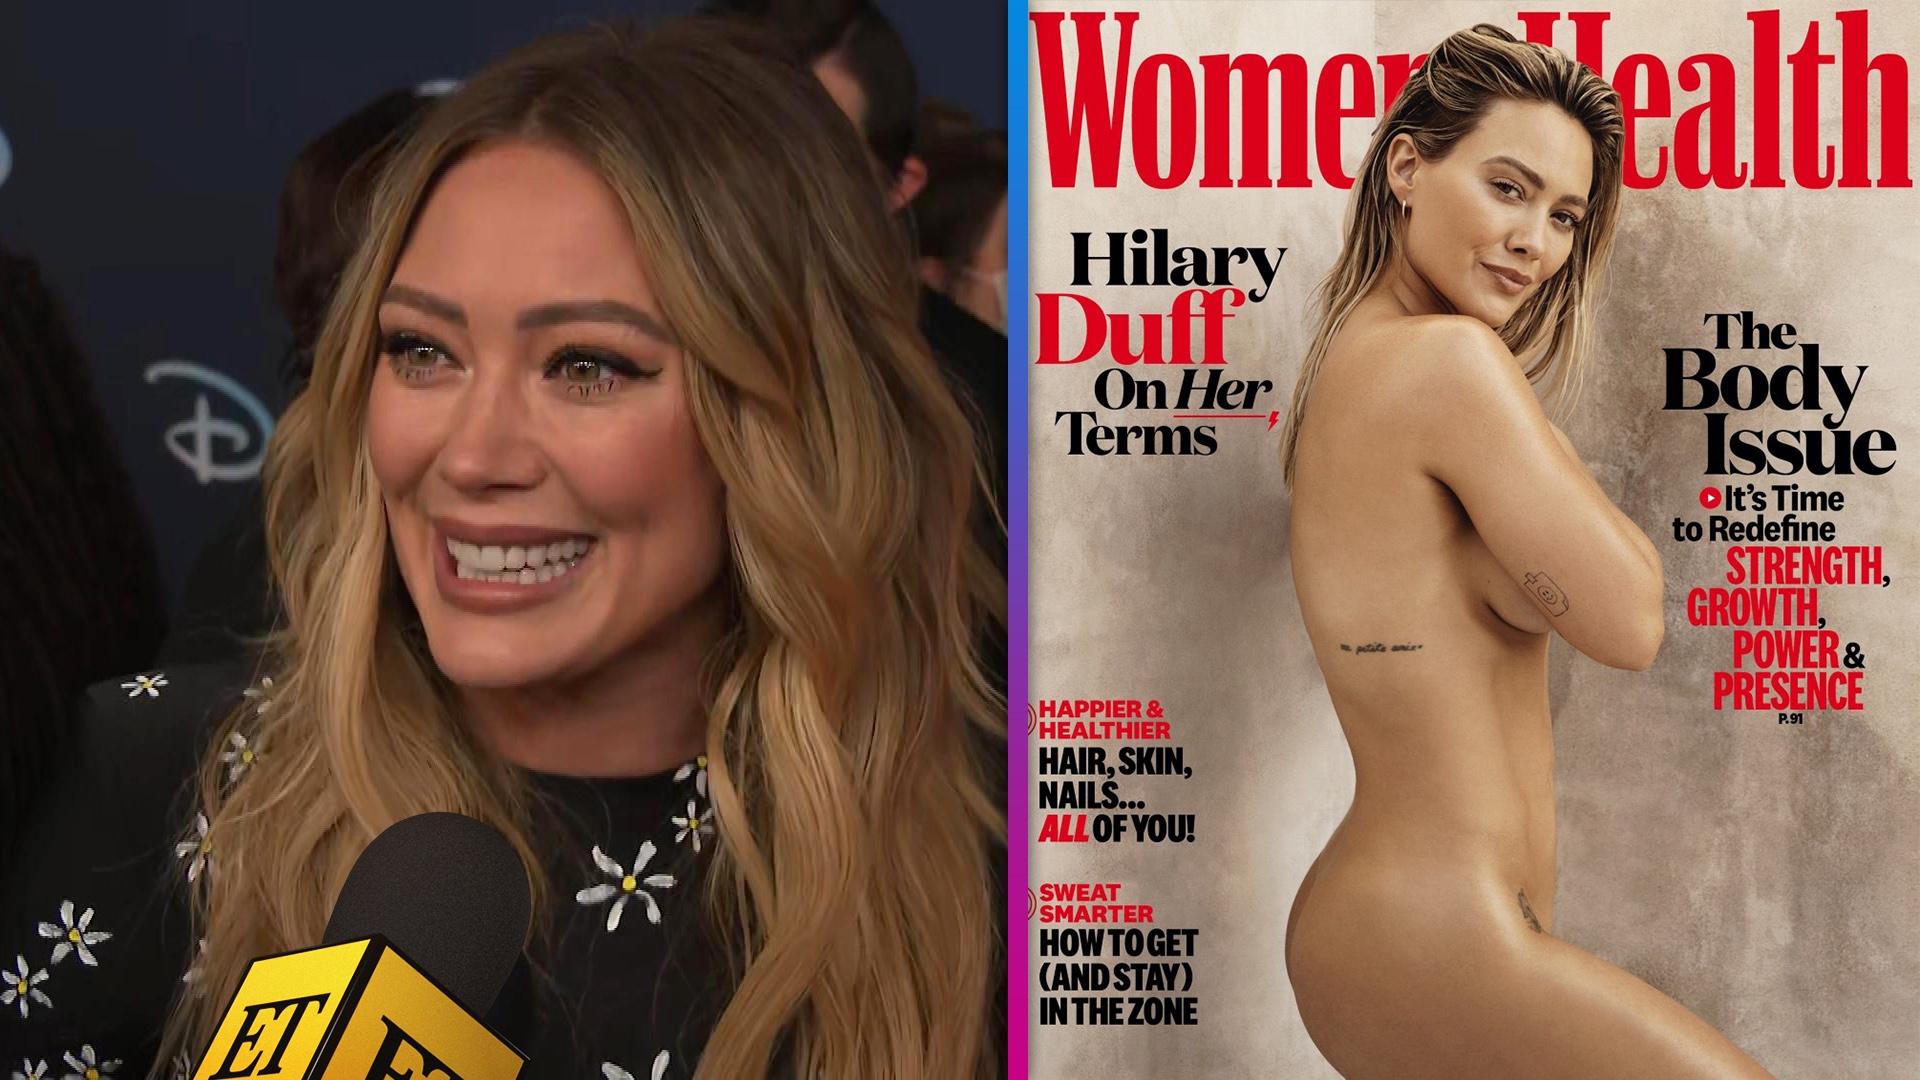 WATCH: Hilary Duff flashes boobs on TV